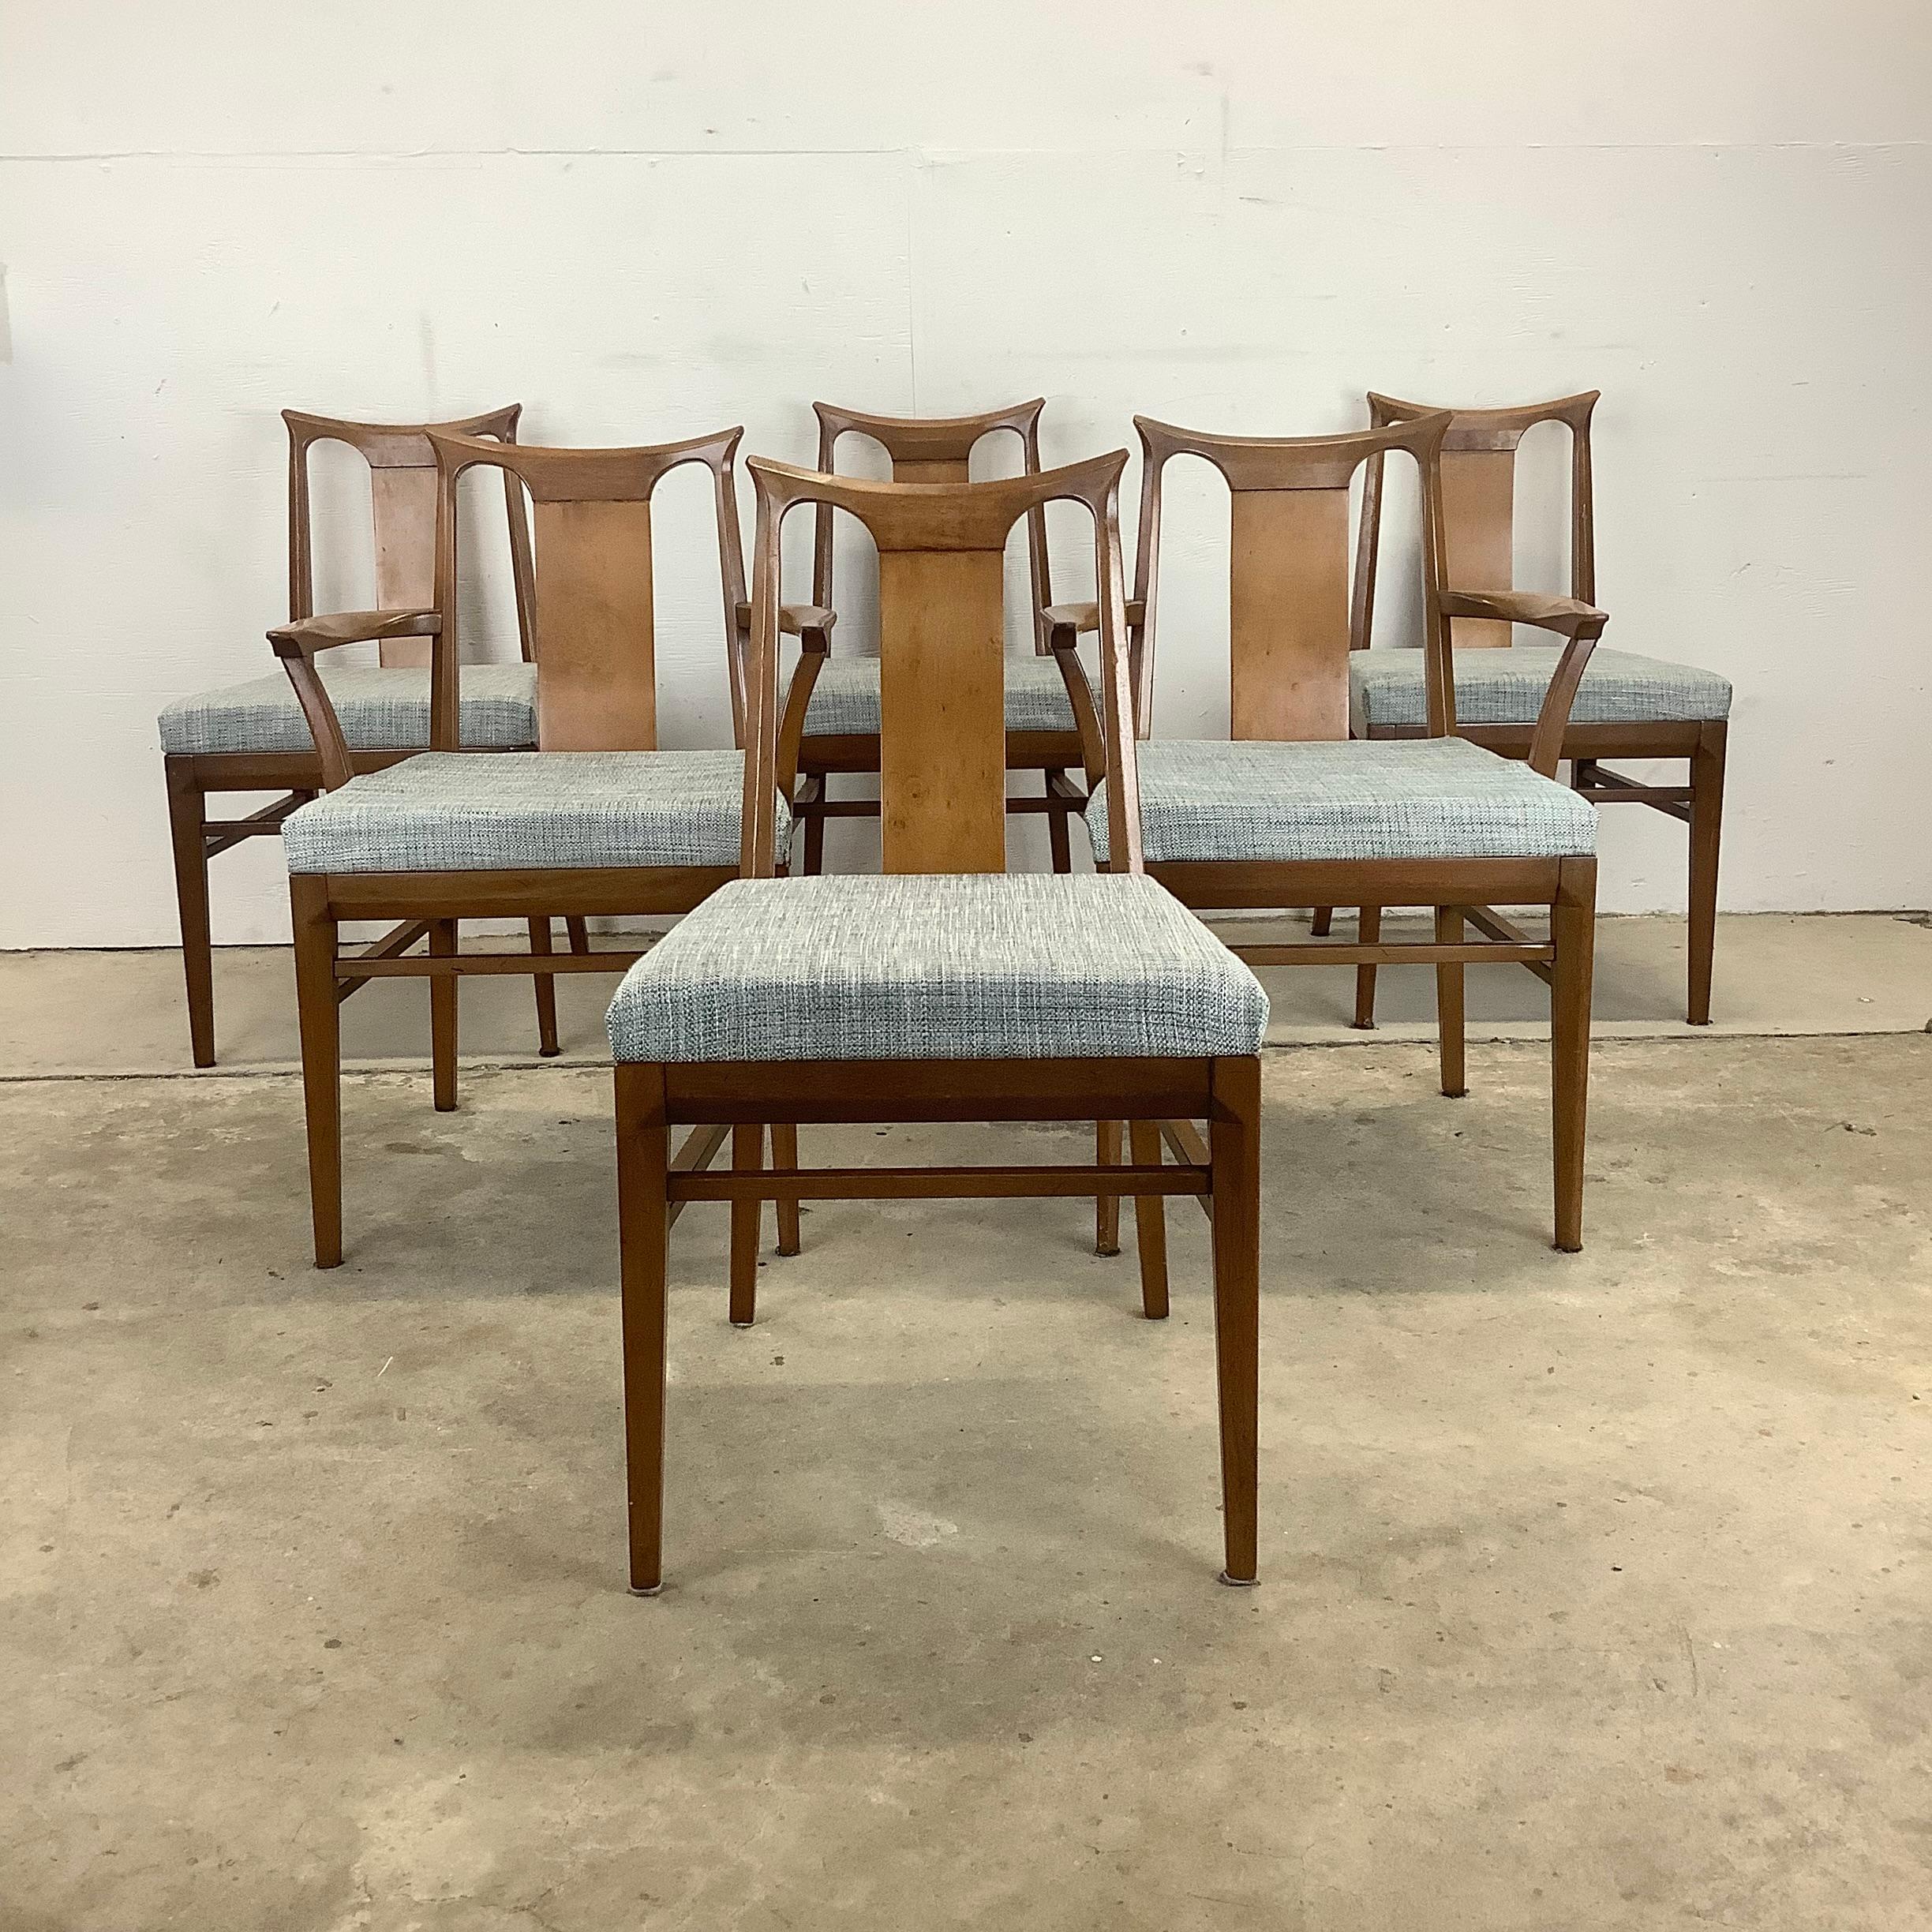 This matching set of six Mid-Century Modern dining chairs feature vintage walnut finish, sculptural seat backs, and comfortable upholstered seats. The comfortable and sturdy design of this set of six vintage dining chairs make them an excellent